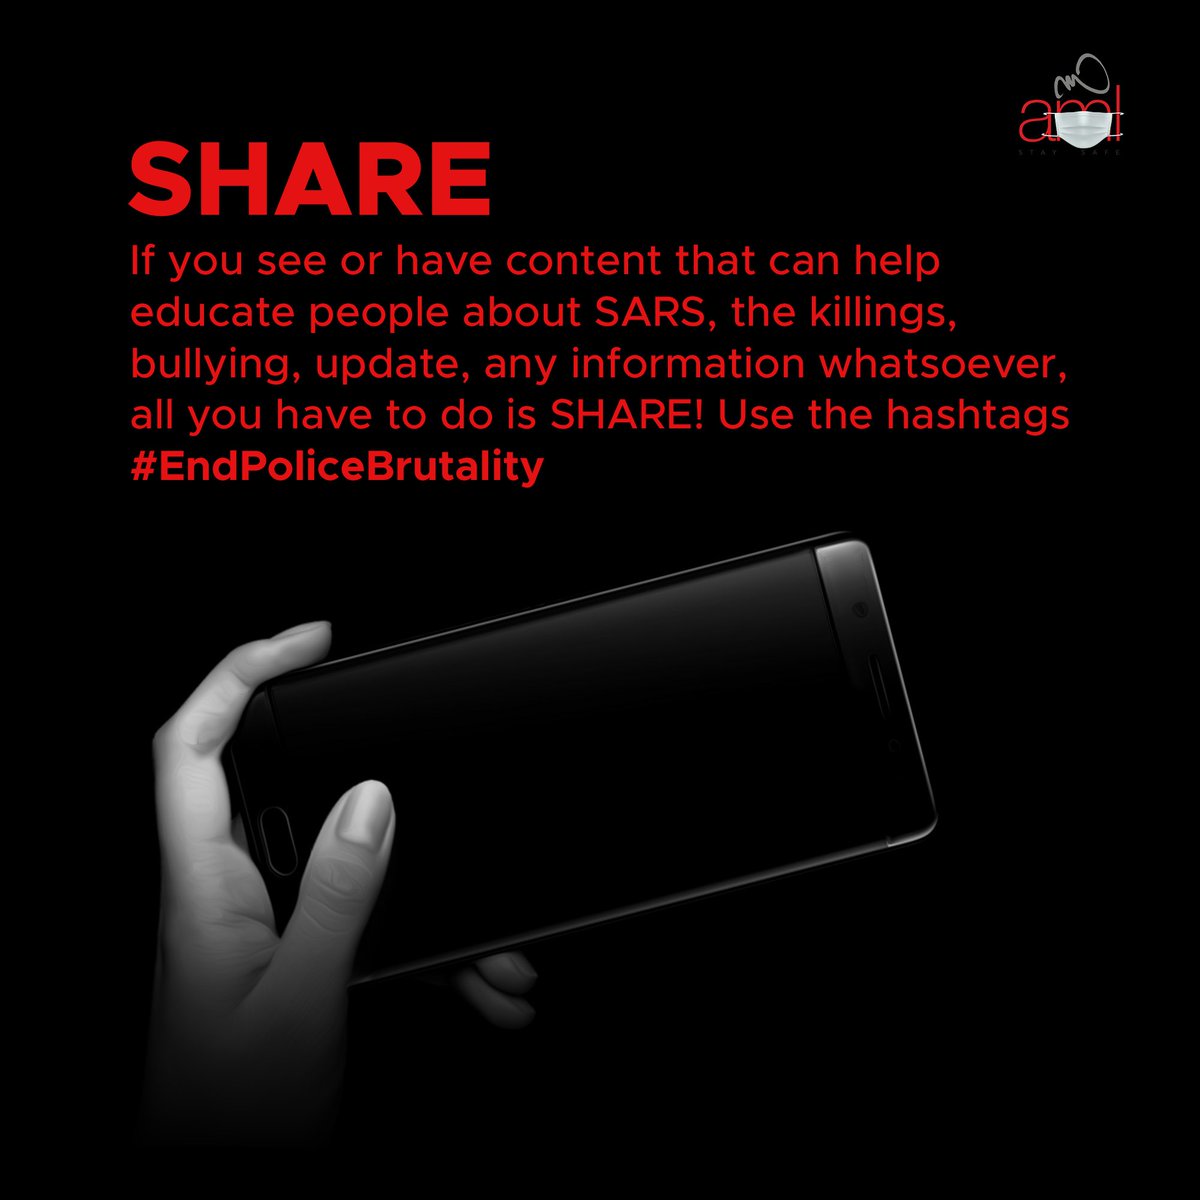 Share: If you see or have content that can help educate people about SARS, the killings, bullying, update, any information whatsoever, all you have to do is SHARE! Use the hashtags